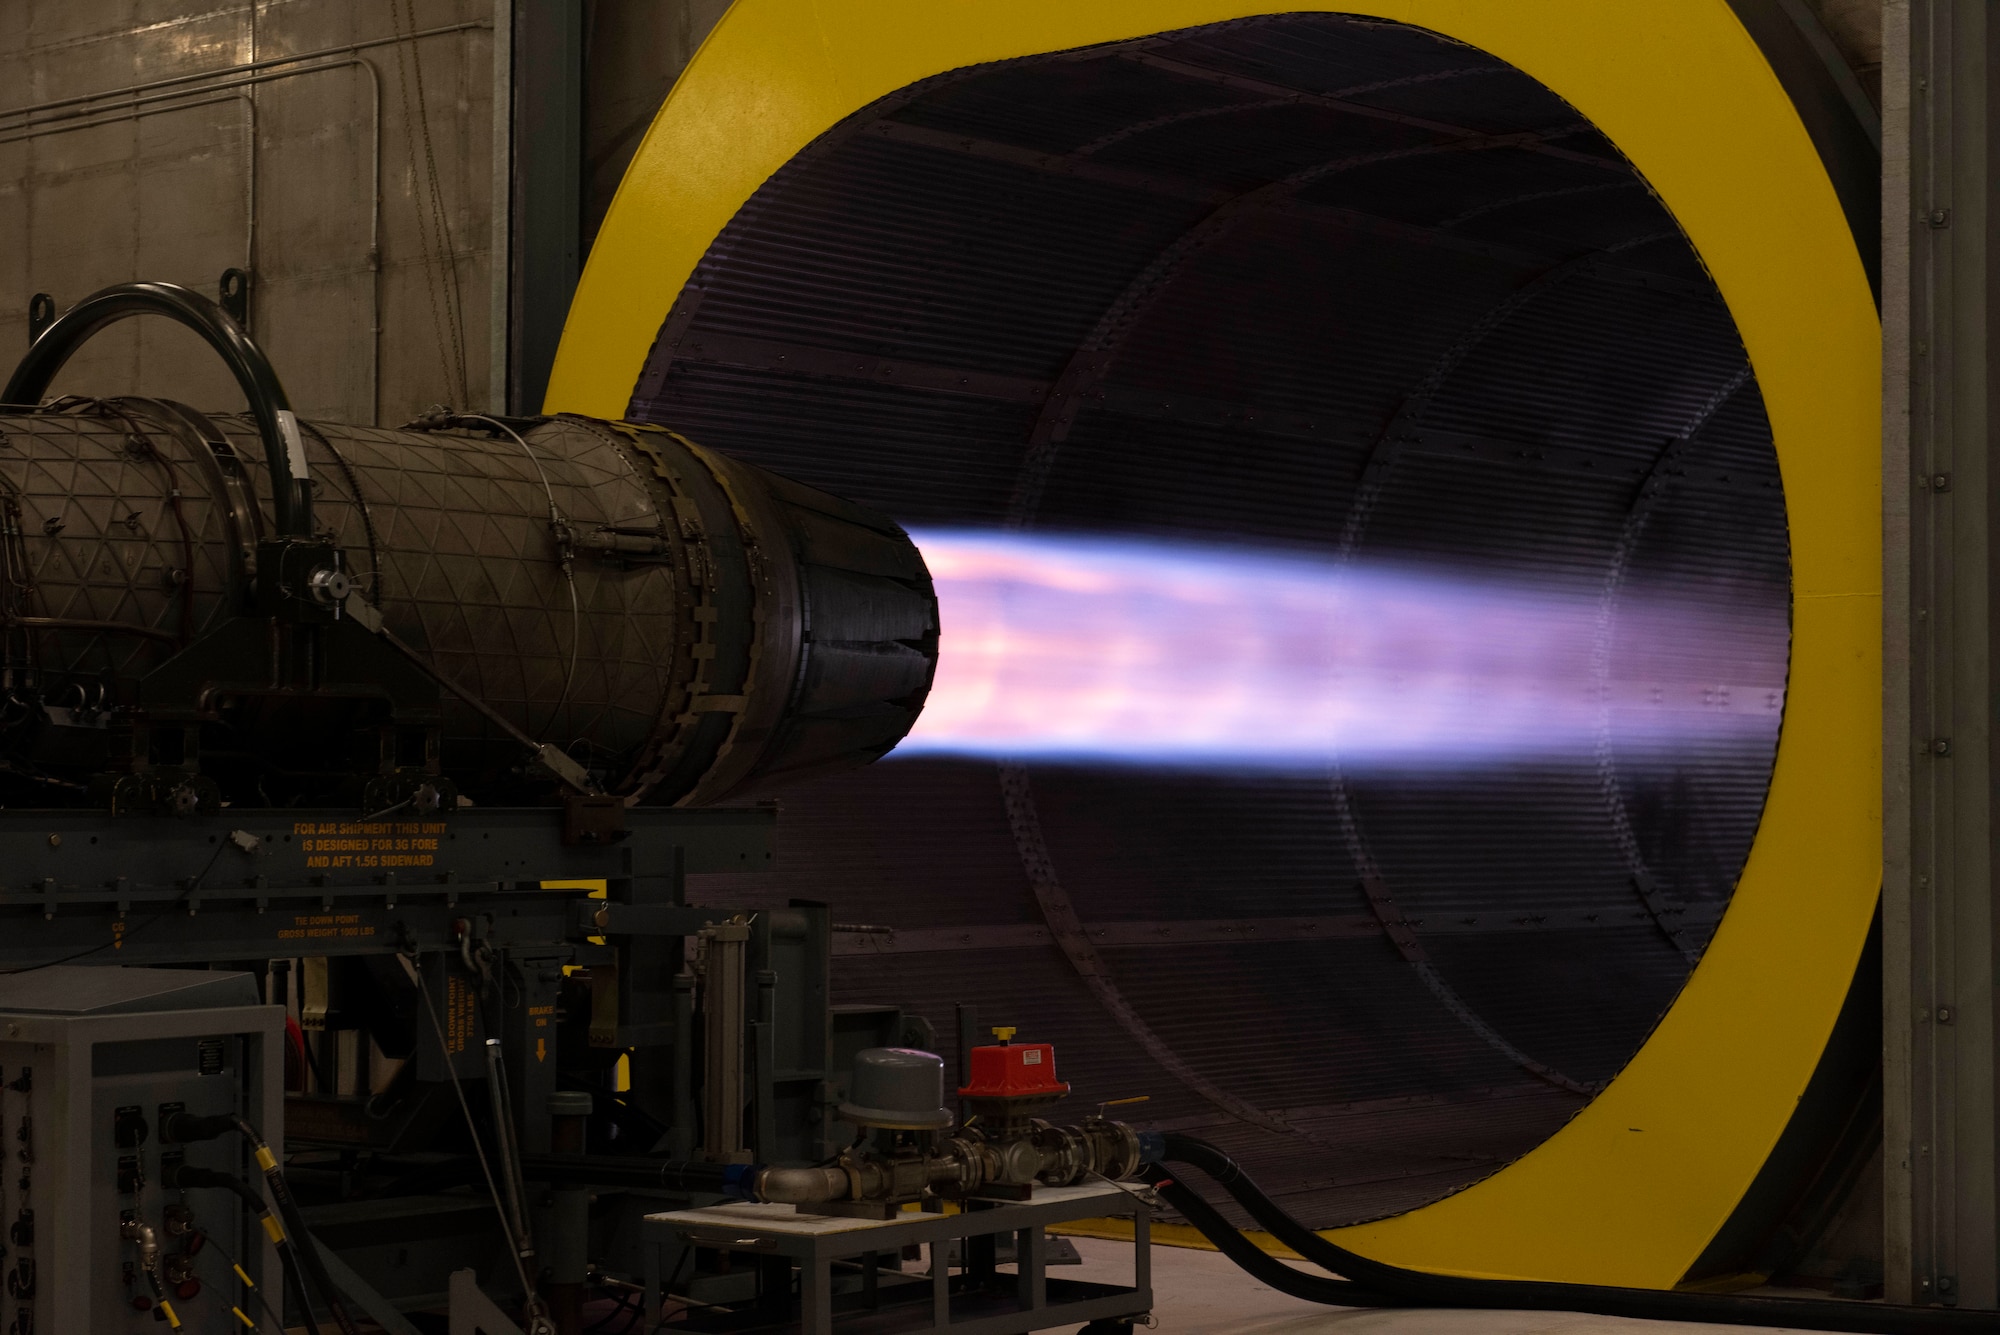 Airmen from the 49th Component Maintenance Squadron conduct a test run on a Pratt & Whitney F100 turbofan engine in the hush house at Holloman Air Force Base, New Mexico, Sept. 6, 2022. The hush house is a safe, enclosed safe designed to facilitate aircraft engine testing. (U.S. Air photo by Airman 1st Class Isaiah Pedrazzini)